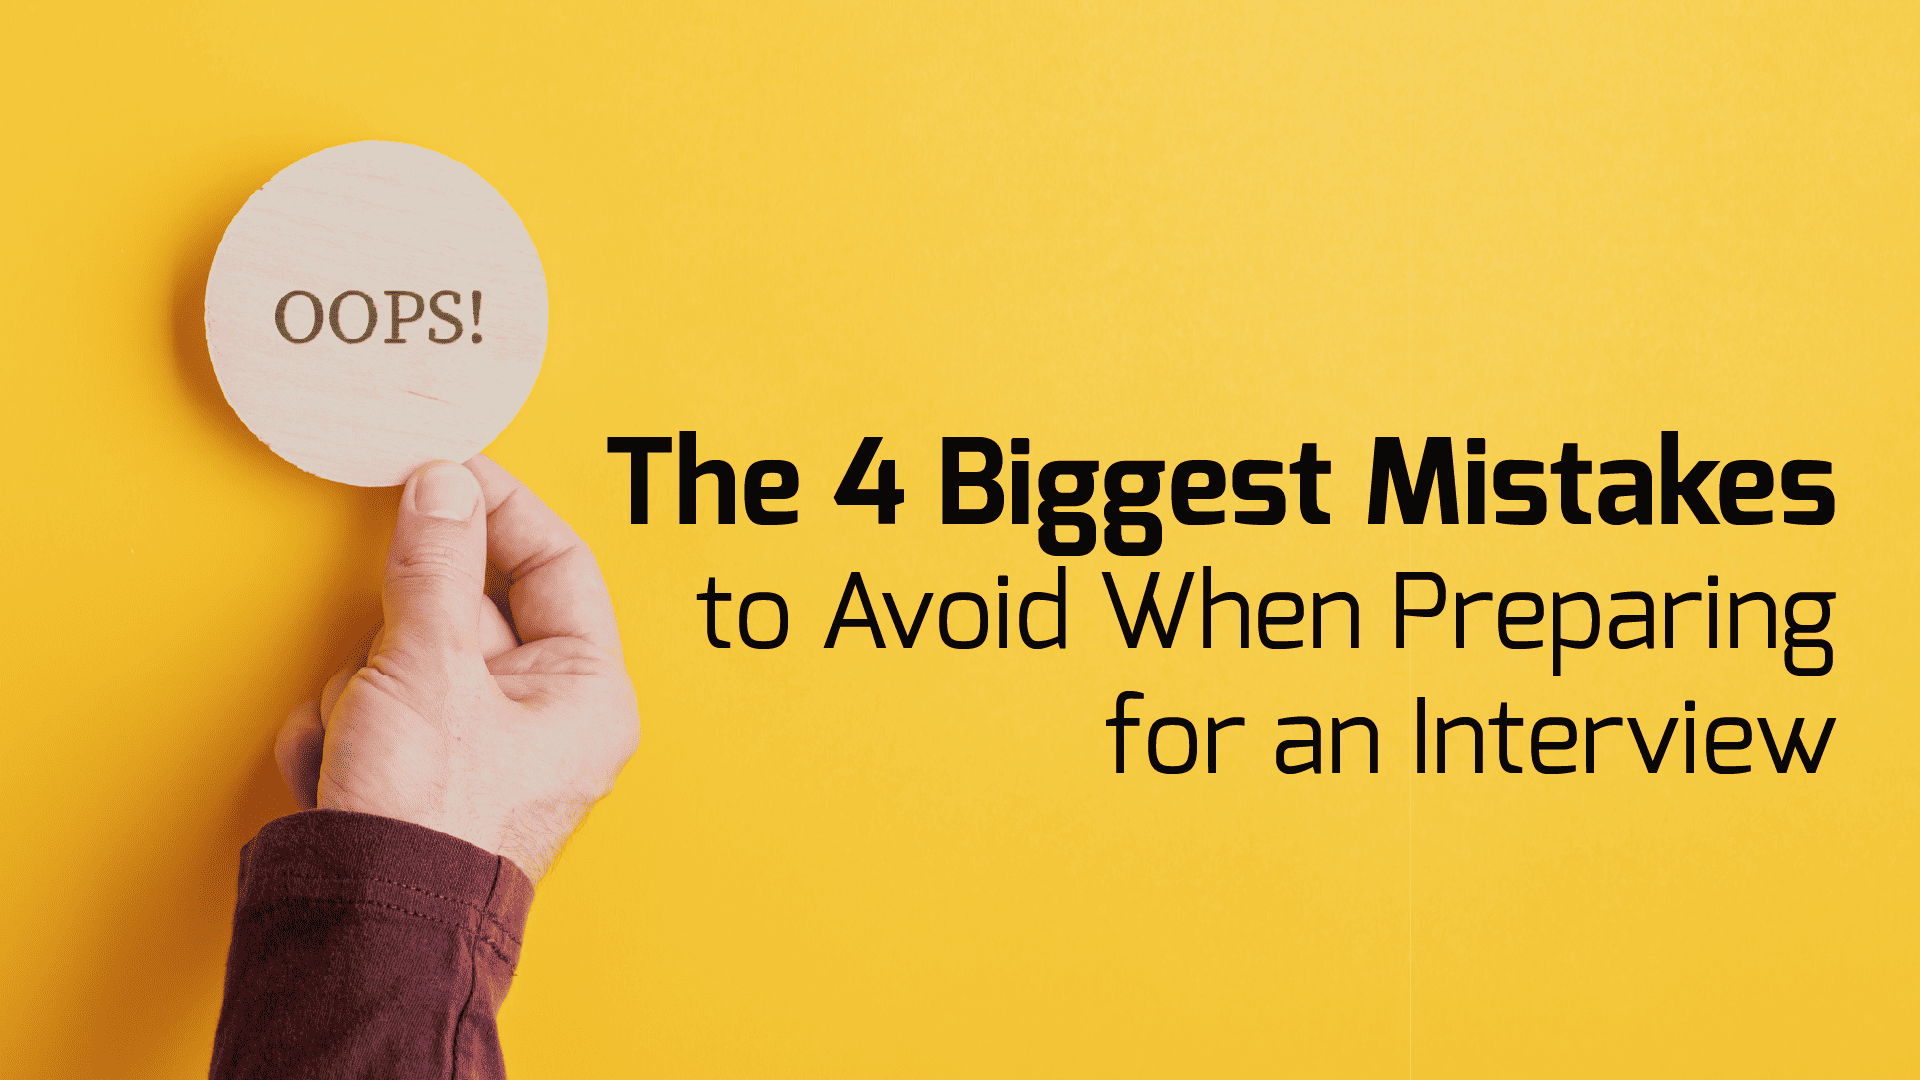 The 4 Biggest Mistakes to Avoid When Preparing for an Interview